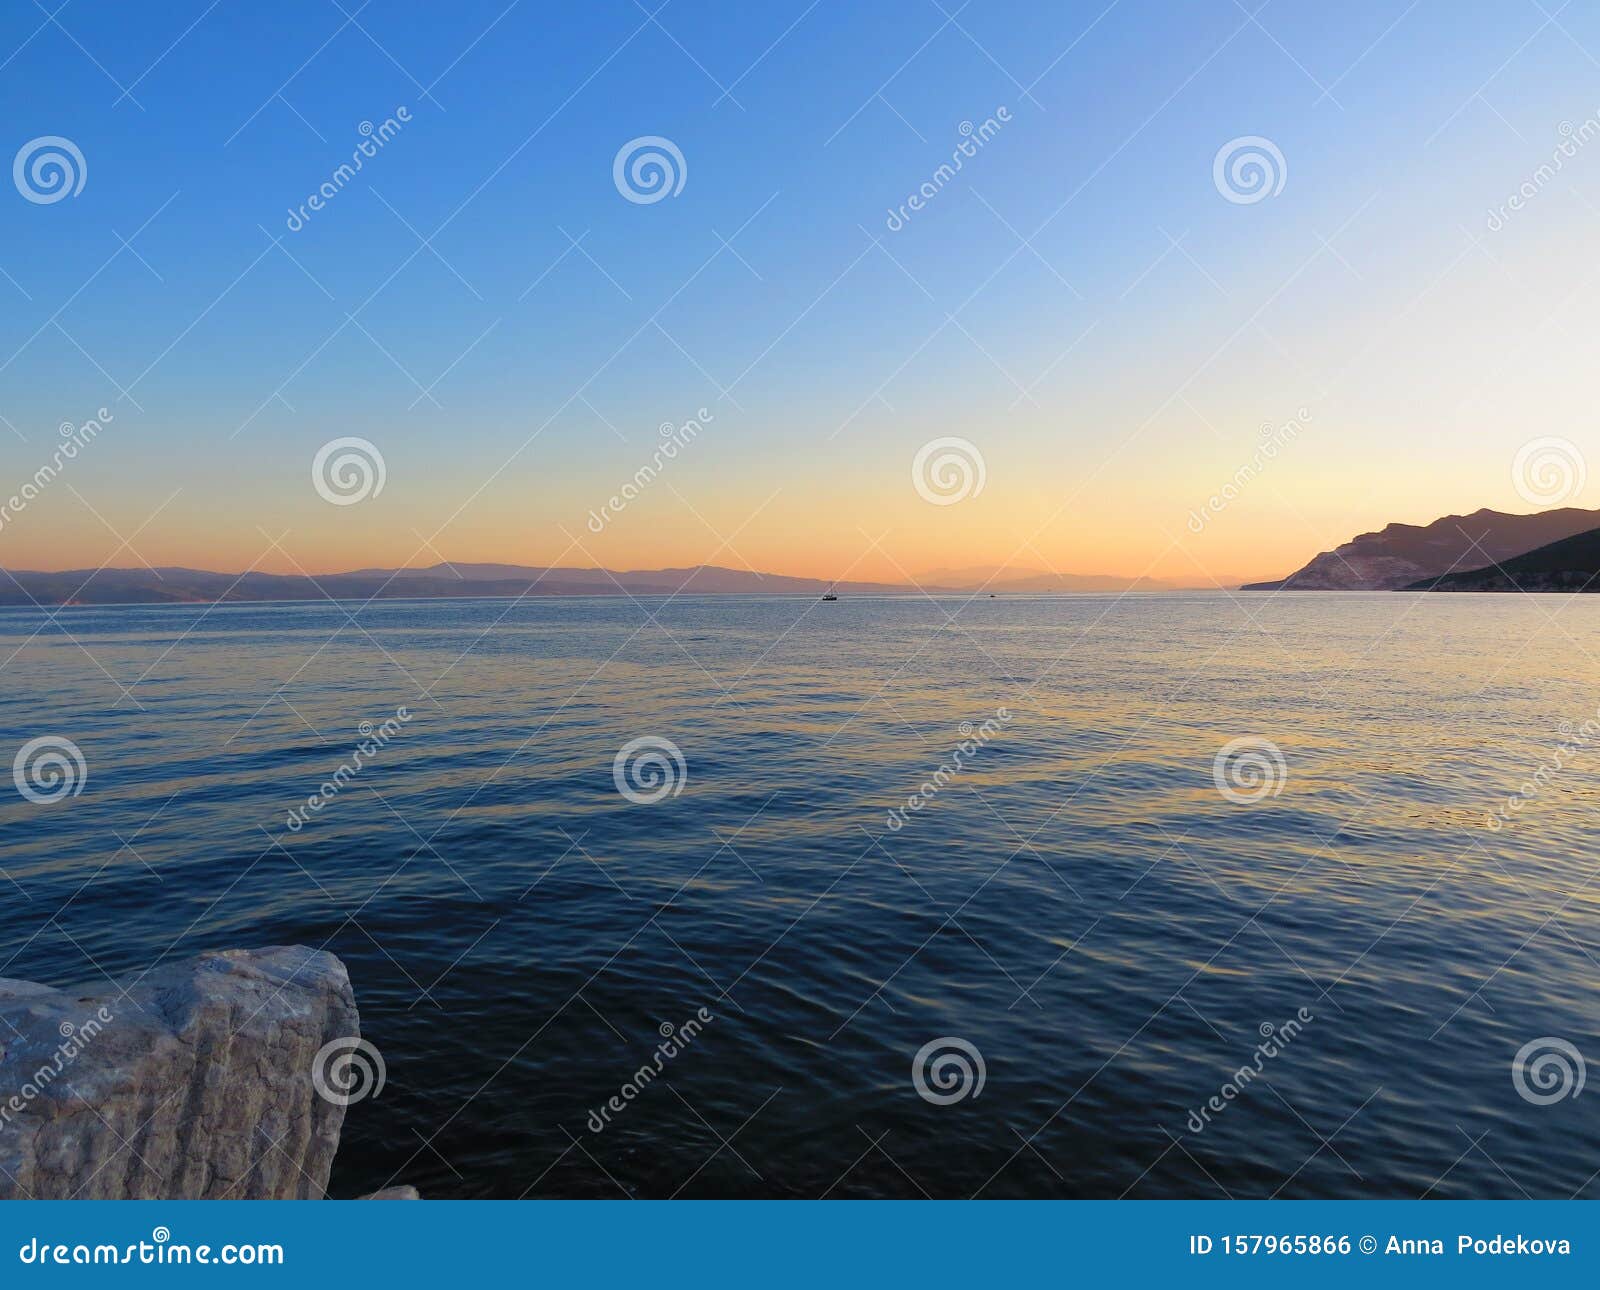 Welcome To Pelion Peninsula Sunset Upon The Pagasetic Gulf Platanias